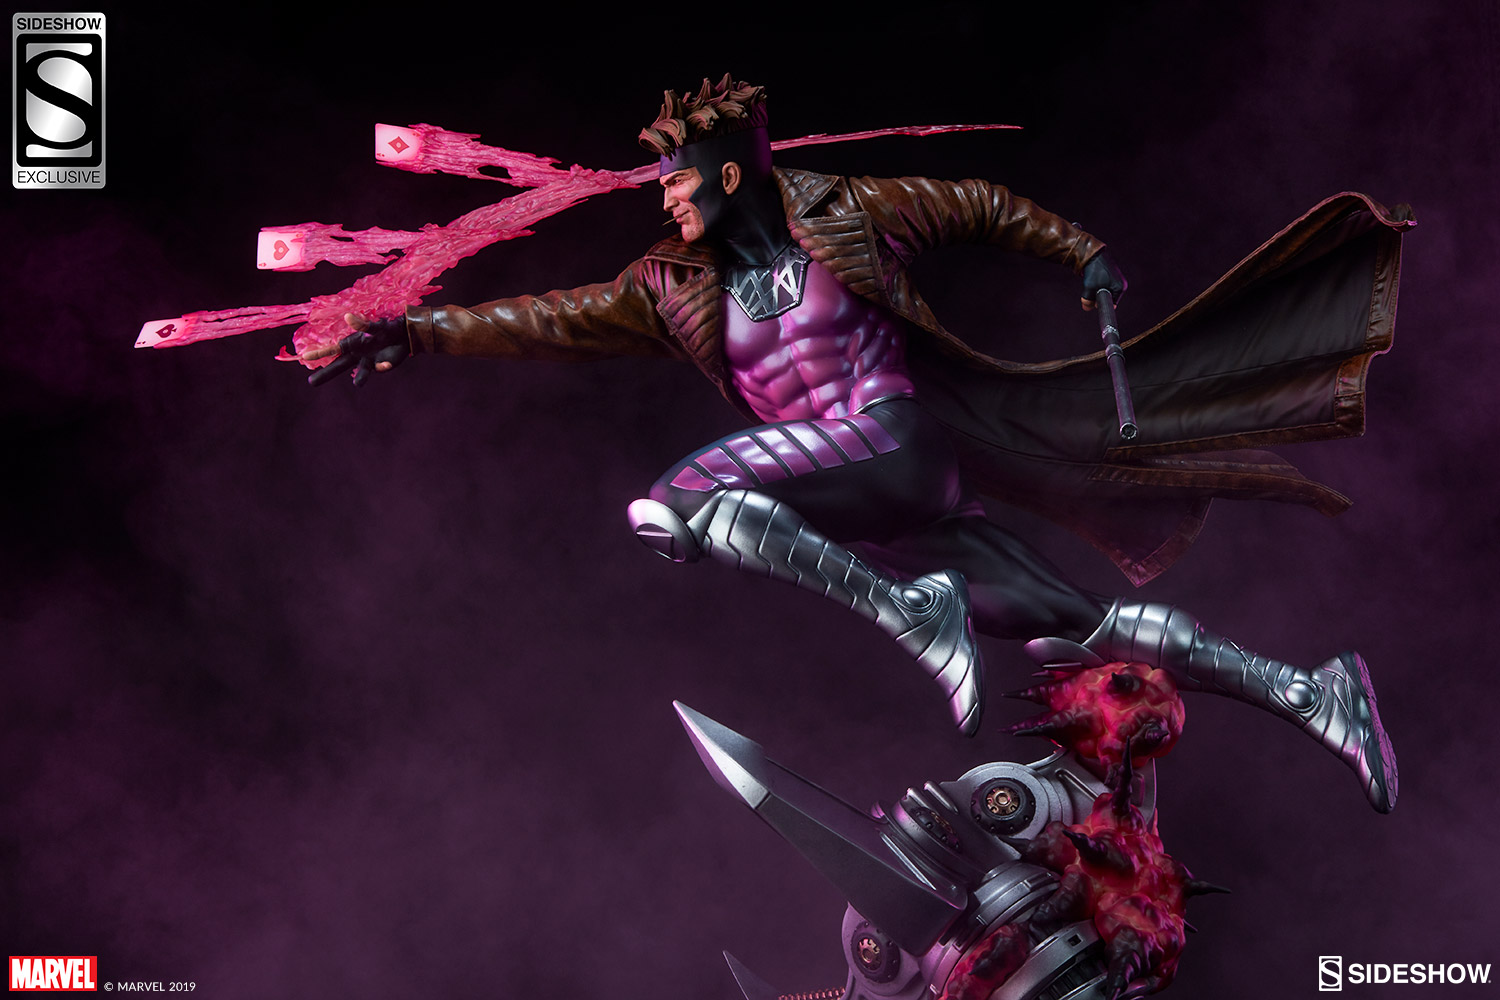 https://www.sideshow.com/storage/product-images/3007271/gambit_marvel_gallery_5d66e82114308.jpg